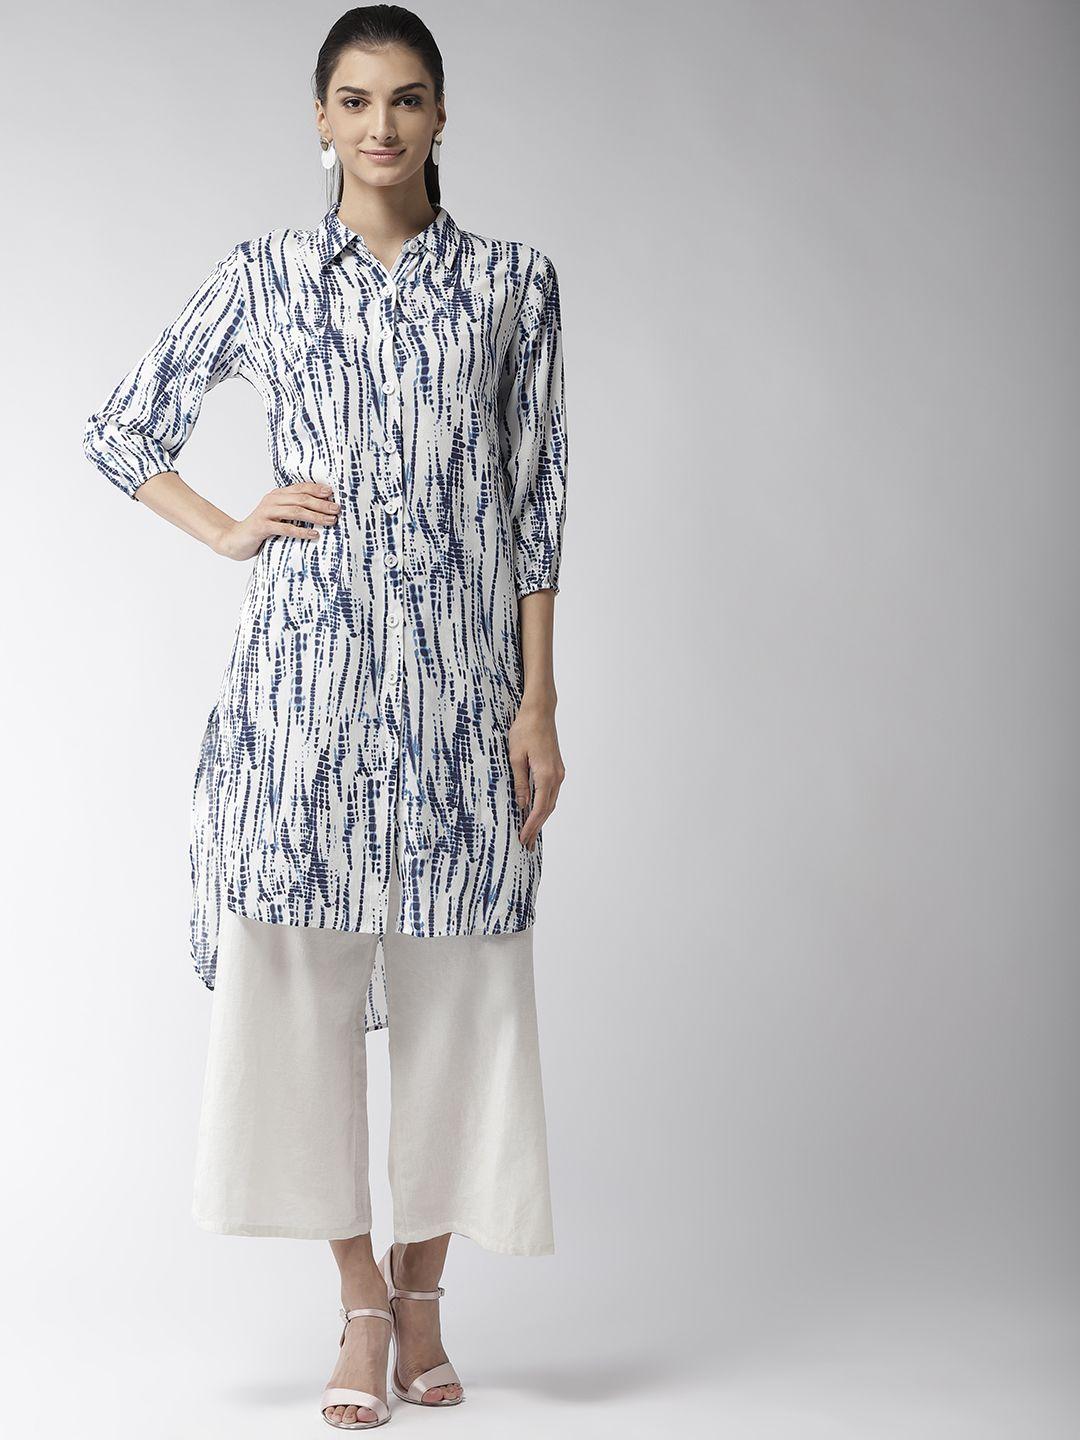 style quotient women off-white & blue dyed straight kurta